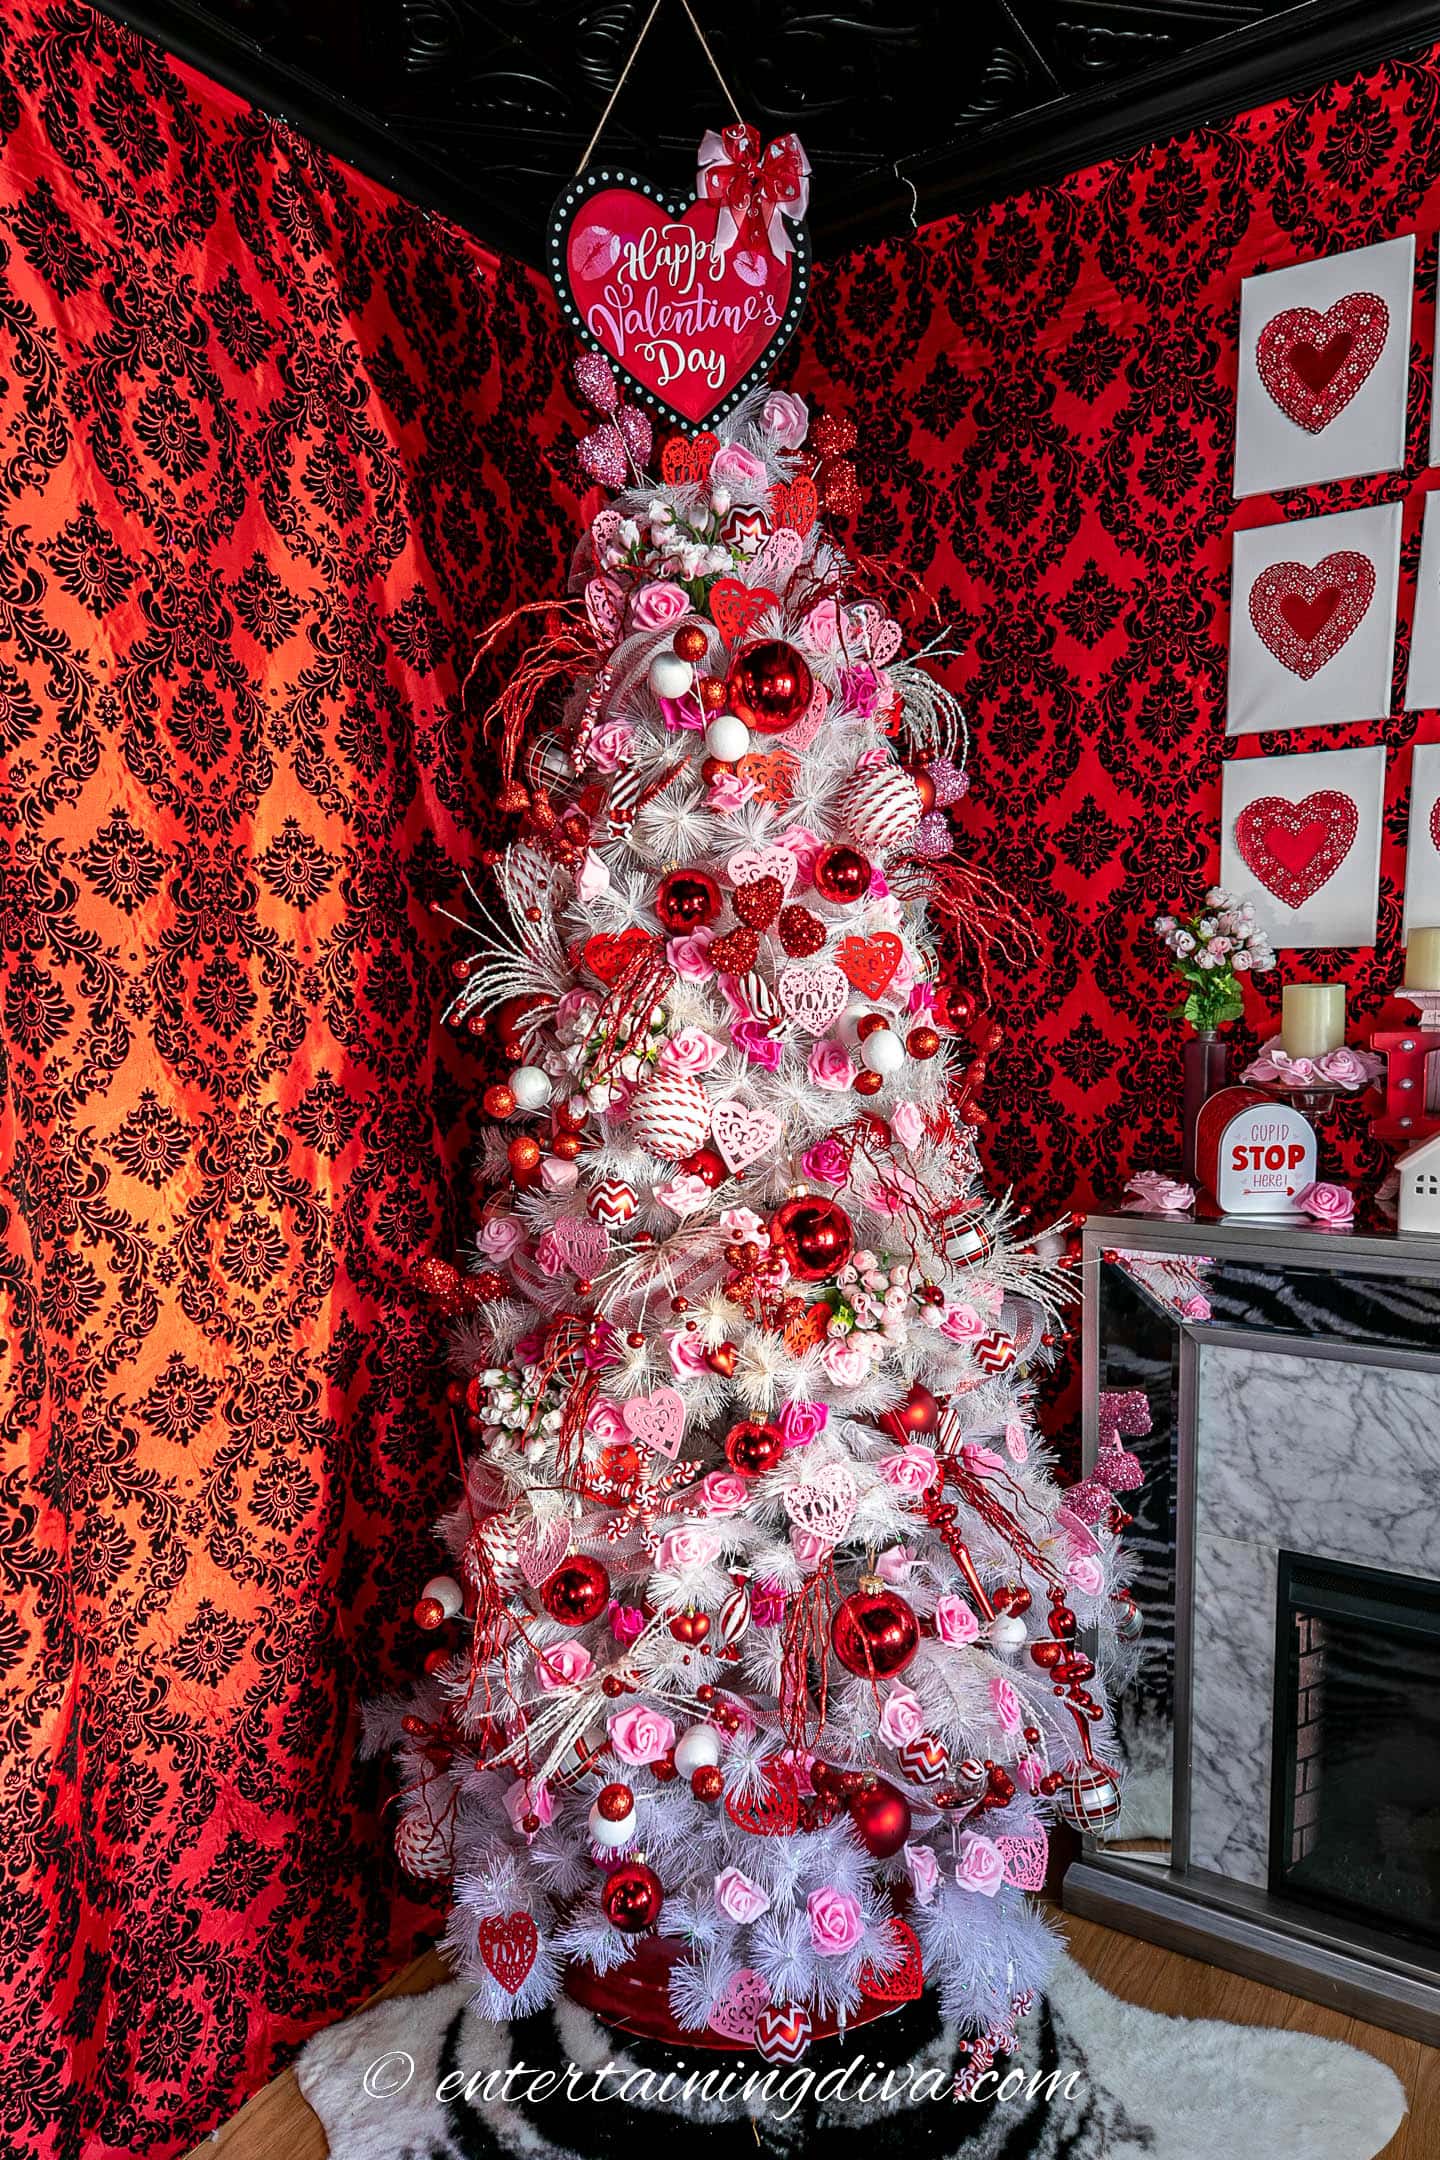 White Valentine tree with pink and red ornaments and a heart tree topper in front of walls covered in red and black fabric